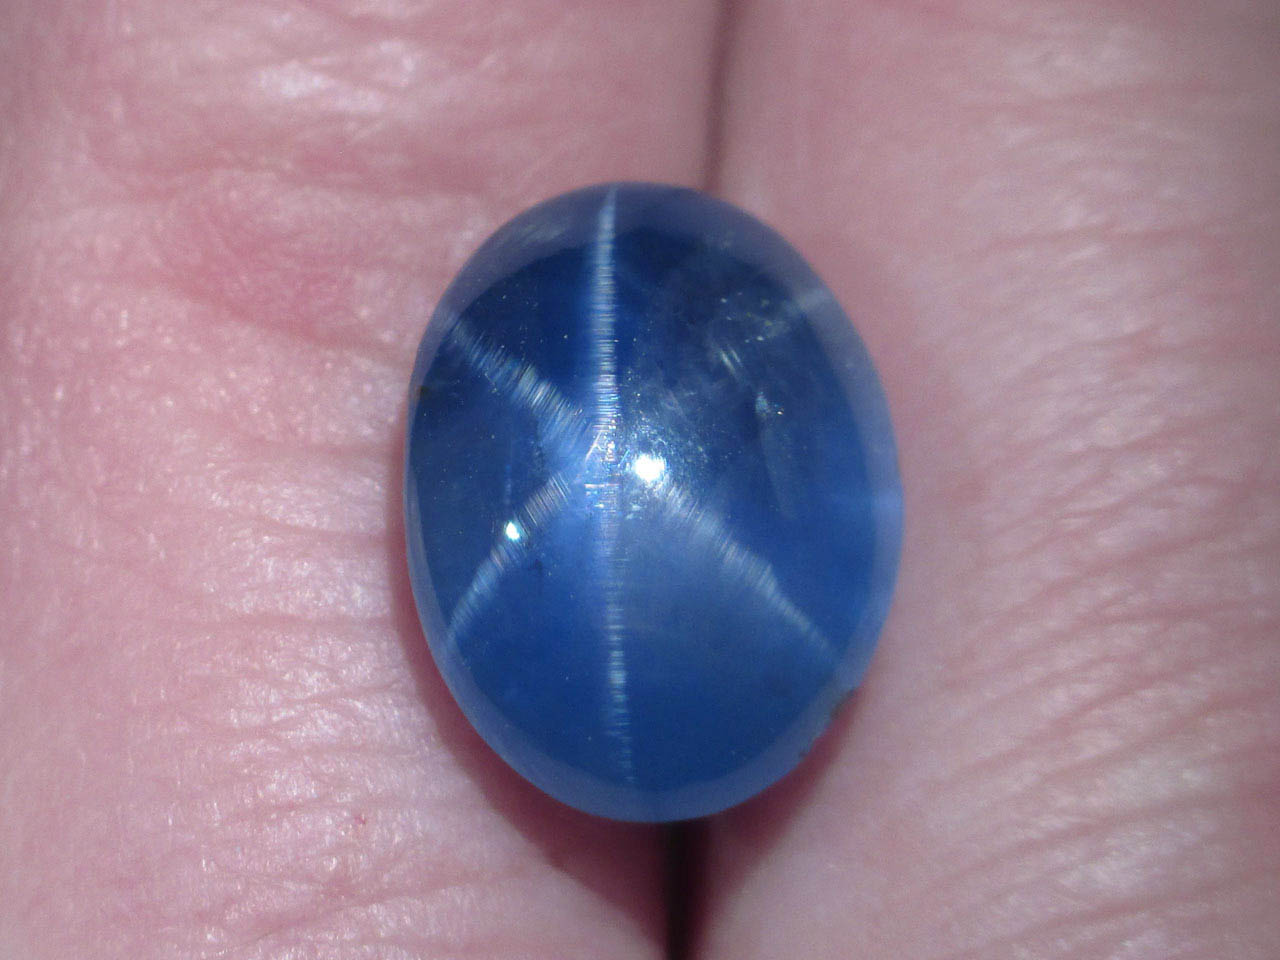 AGL Certified Untreated Mens Blue Star Sapphire Ring 9.3 cts in 14K Yellow Gold